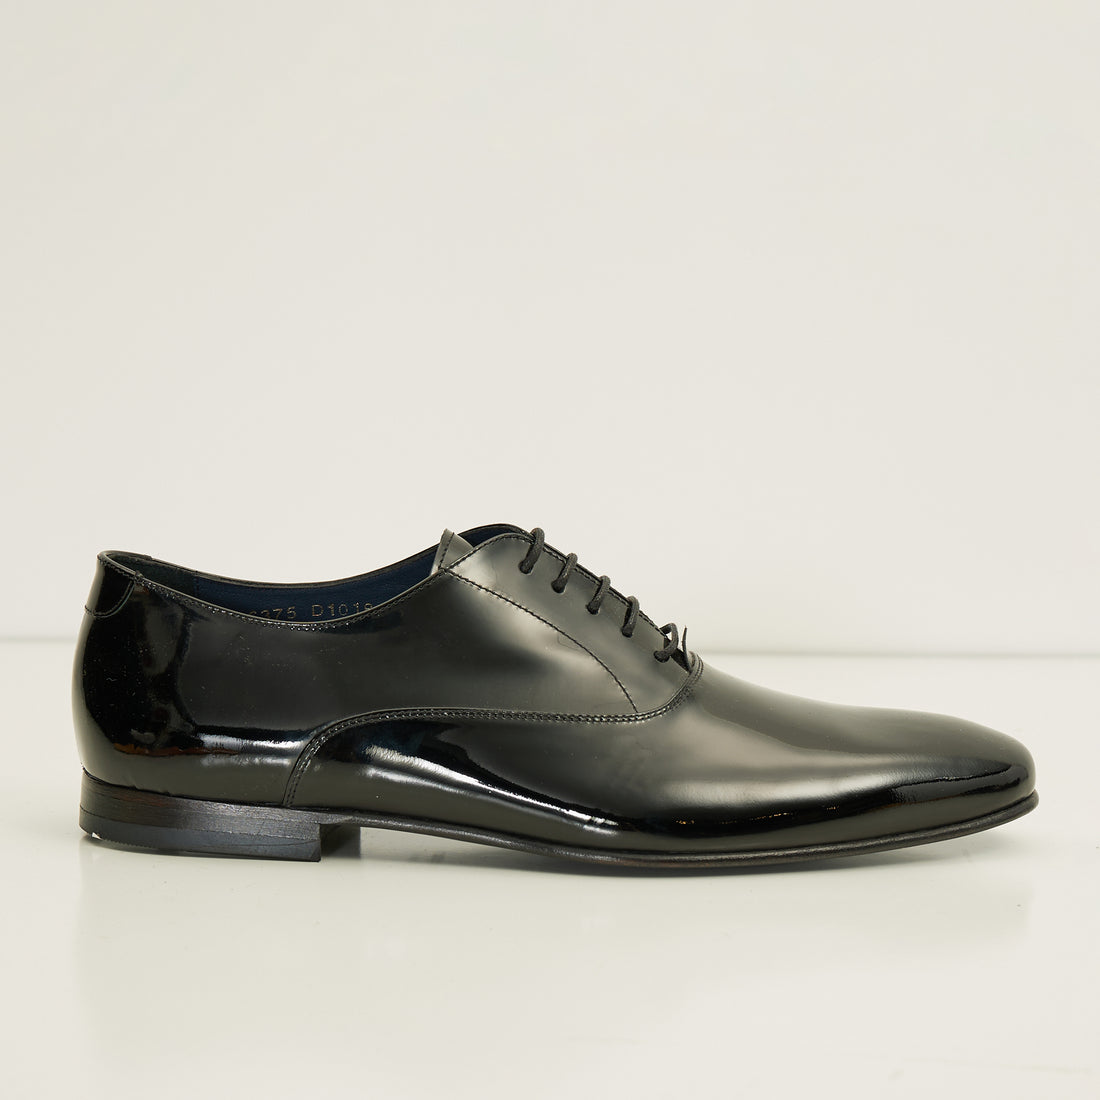 Patent Leather Oxfords - Black